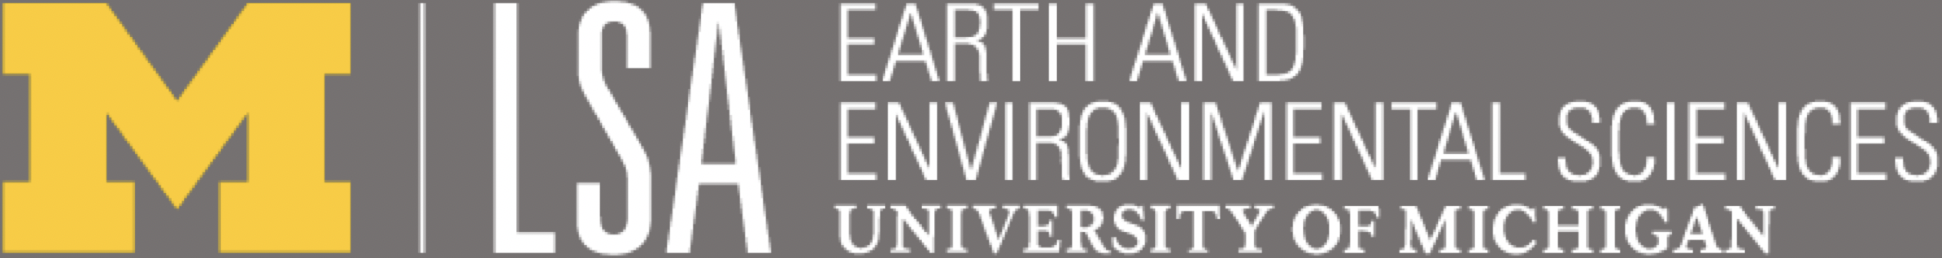 University of Michigan Department of Earth and Environmental Sciences Logo